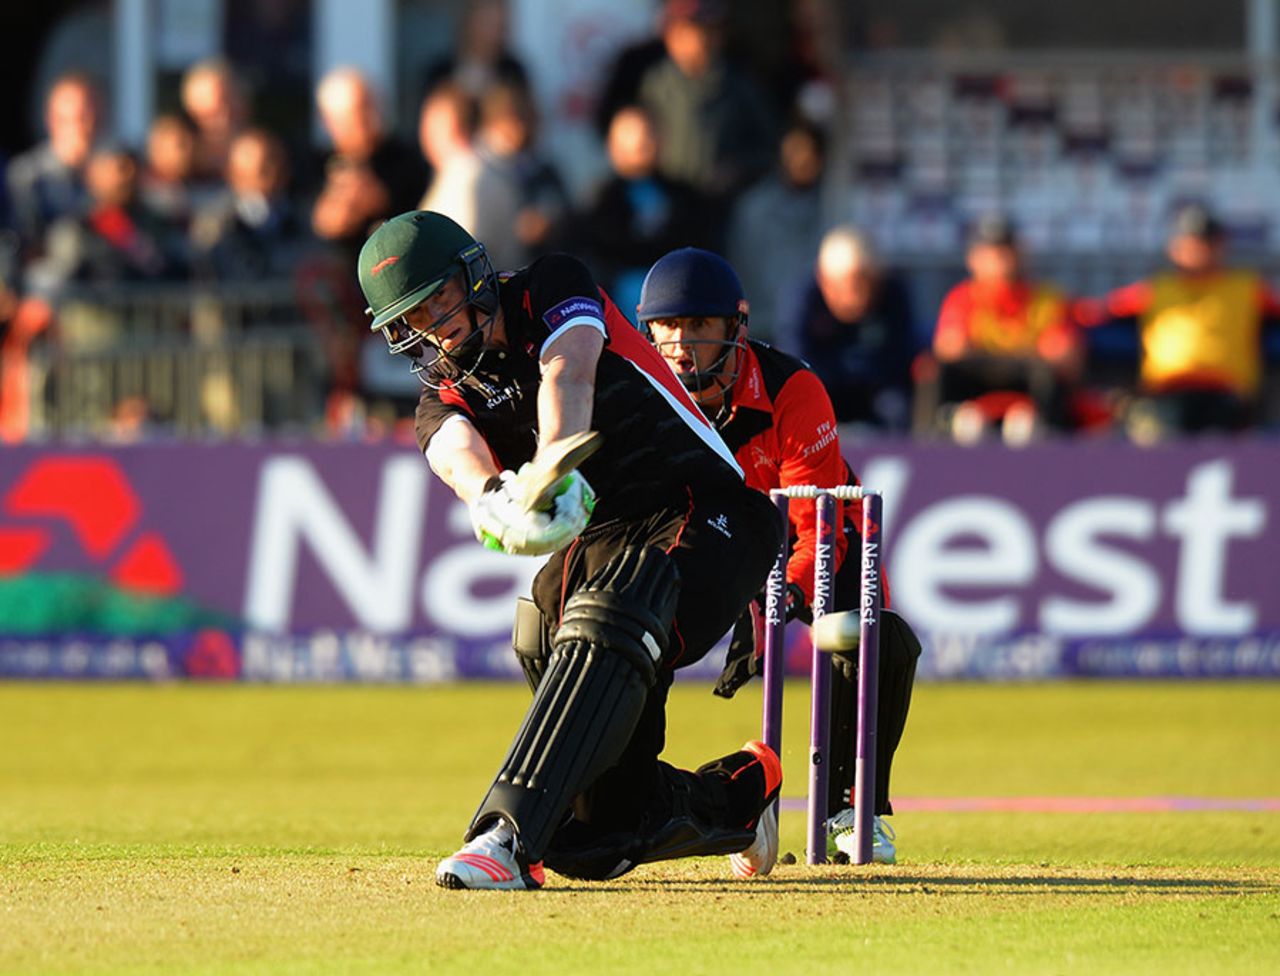 Kevin O'Brien sweeps during an unbeaten 48 that saw Leicestershire home, Leicestershire v Durham, NatWest T20 Blast, Grace Road, May 28, 2015